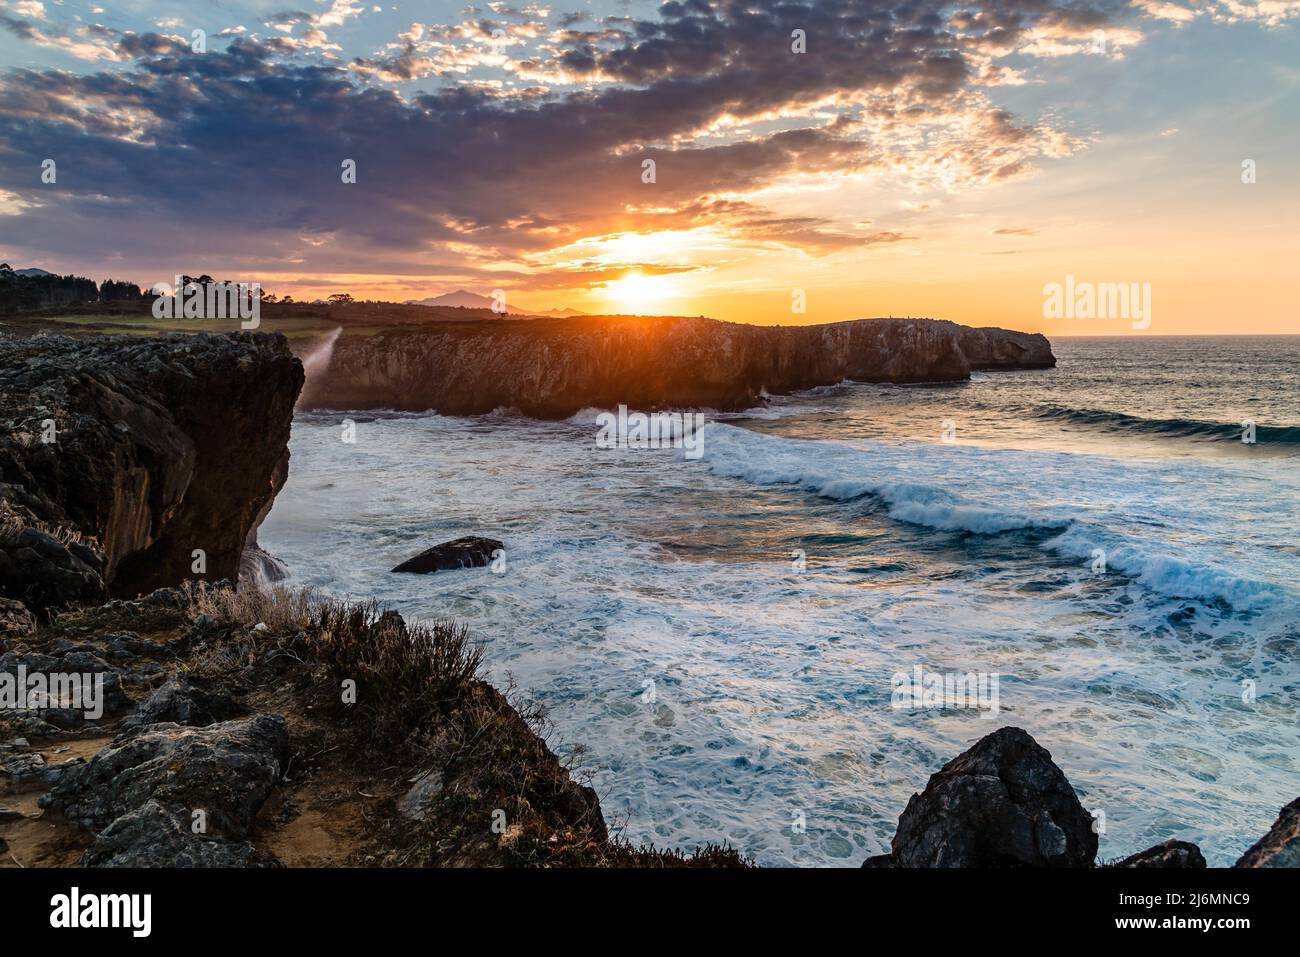 Cliffs at bufones of Pria in the Cantabrian Sea. View at sunset. Asturias, Spain. Stock Photo